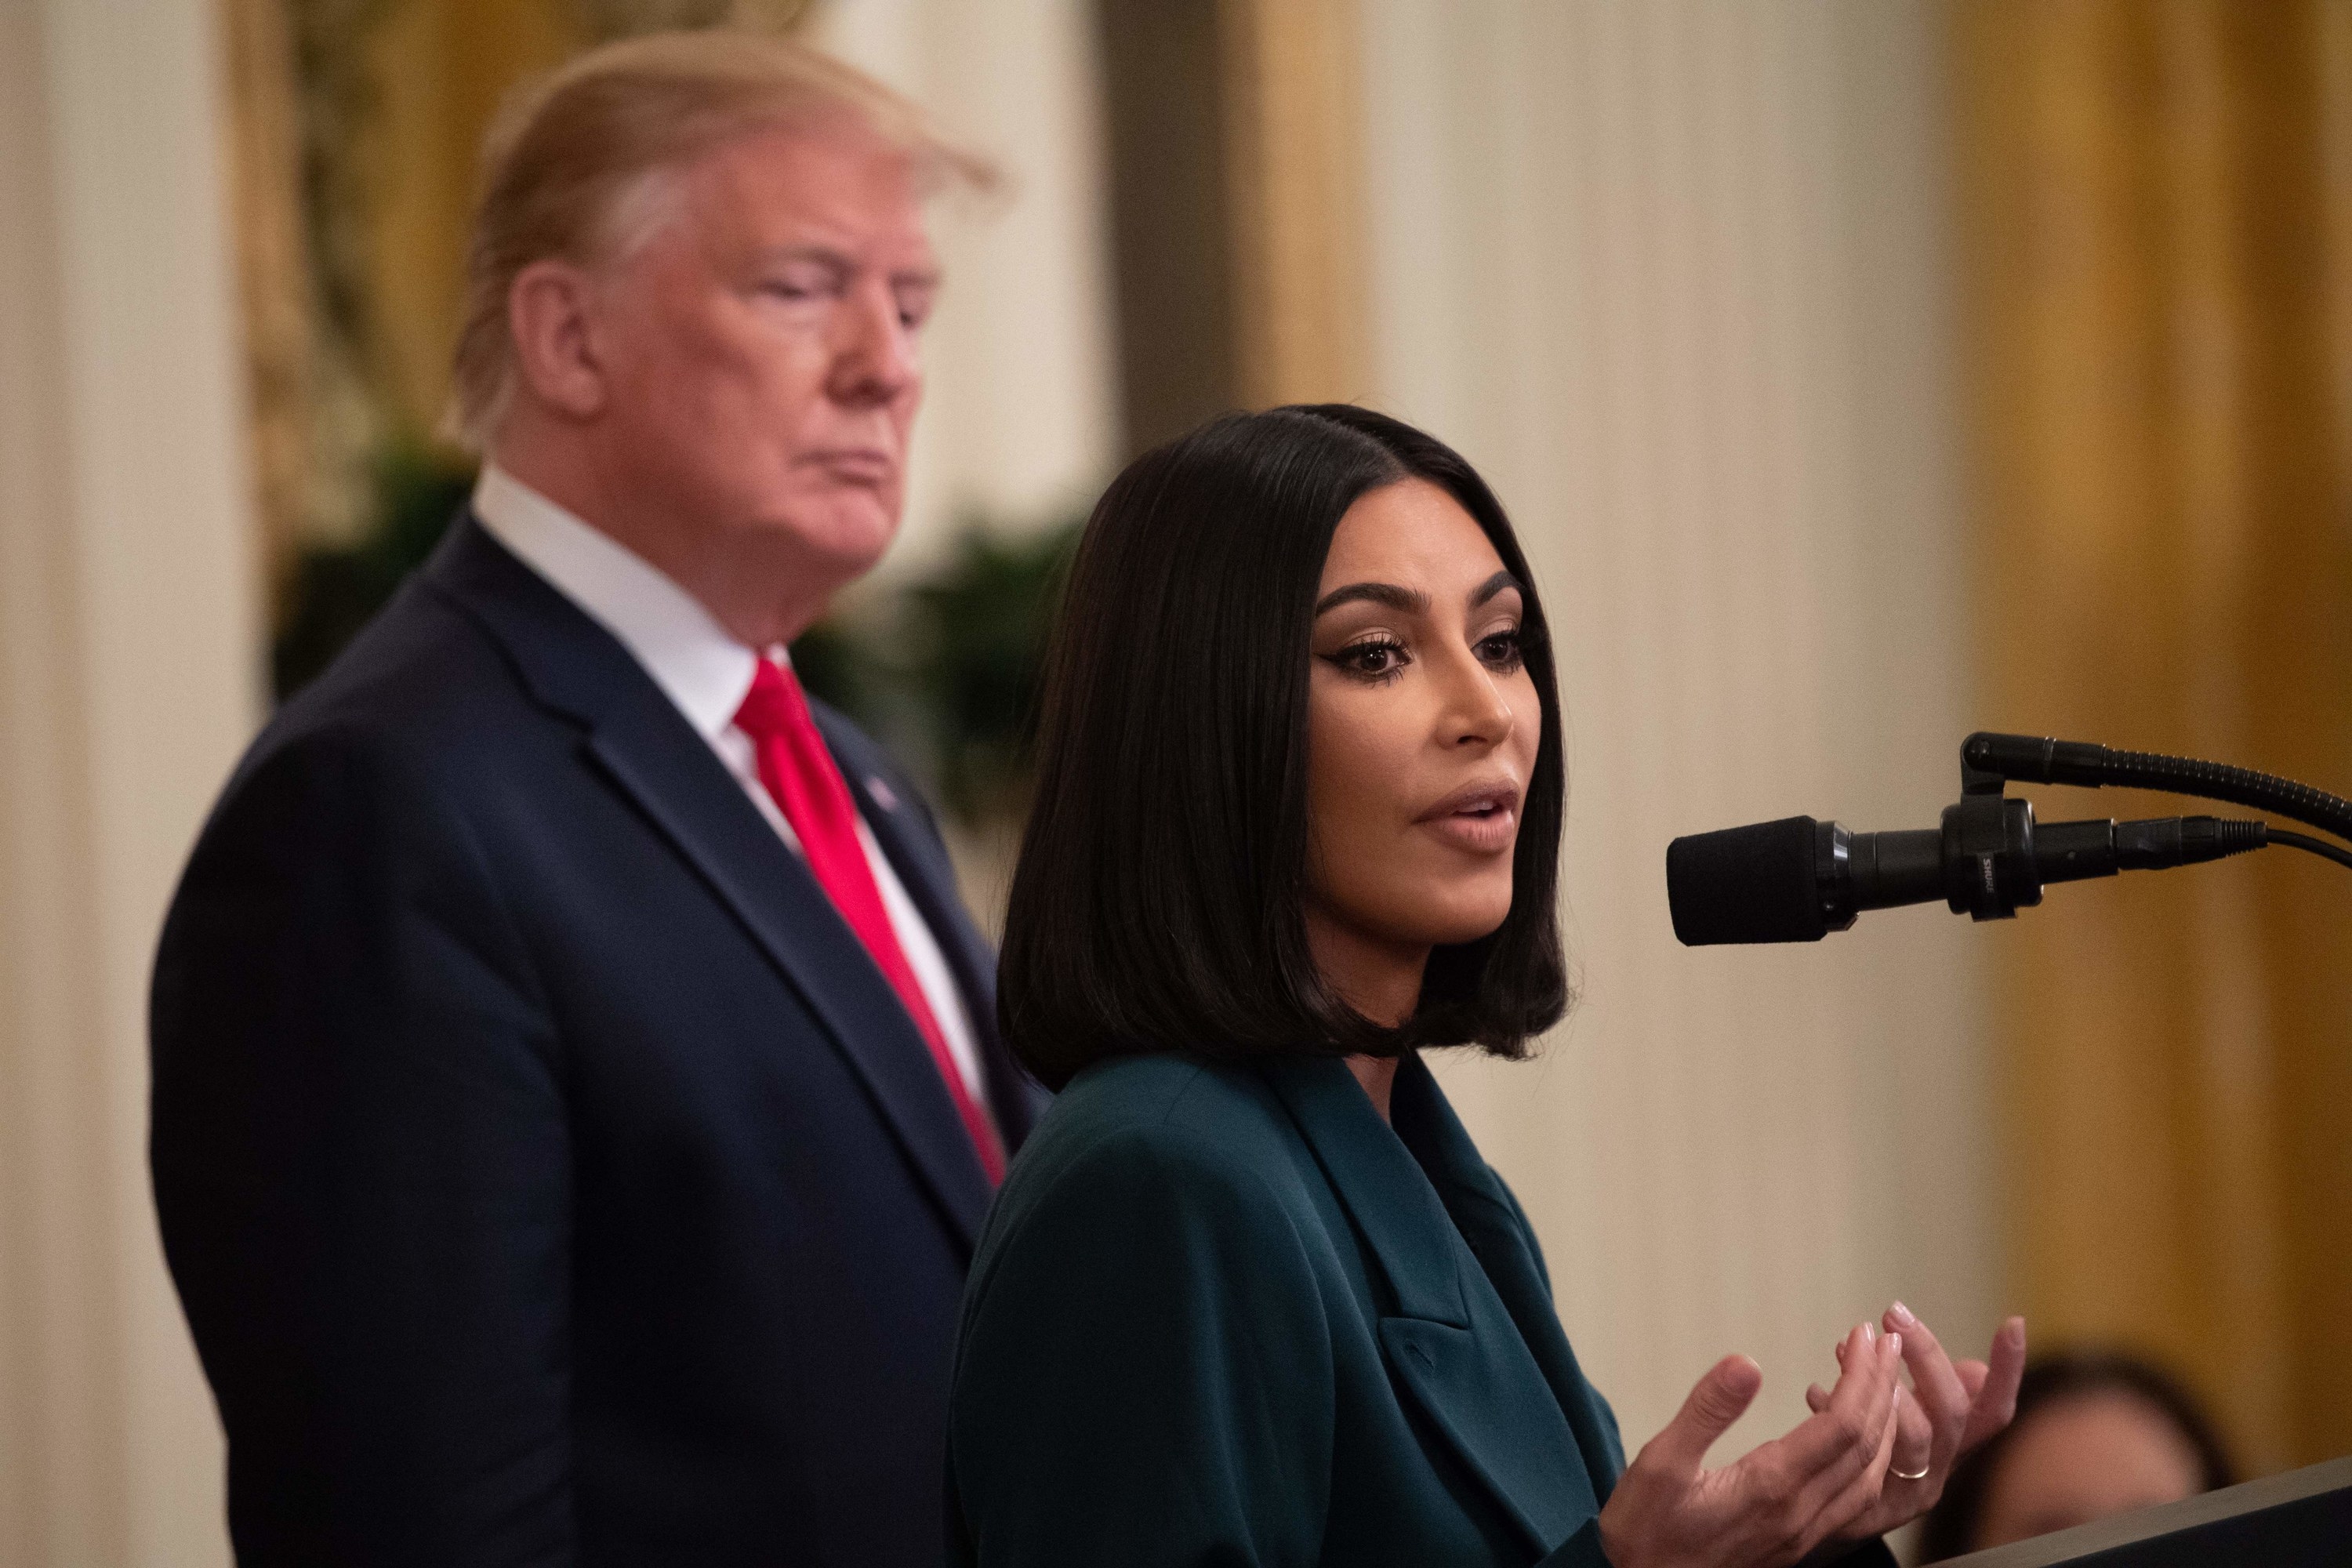 12 People Charged In Connection With Kim Kardashian’s 2016 Paris Robbery